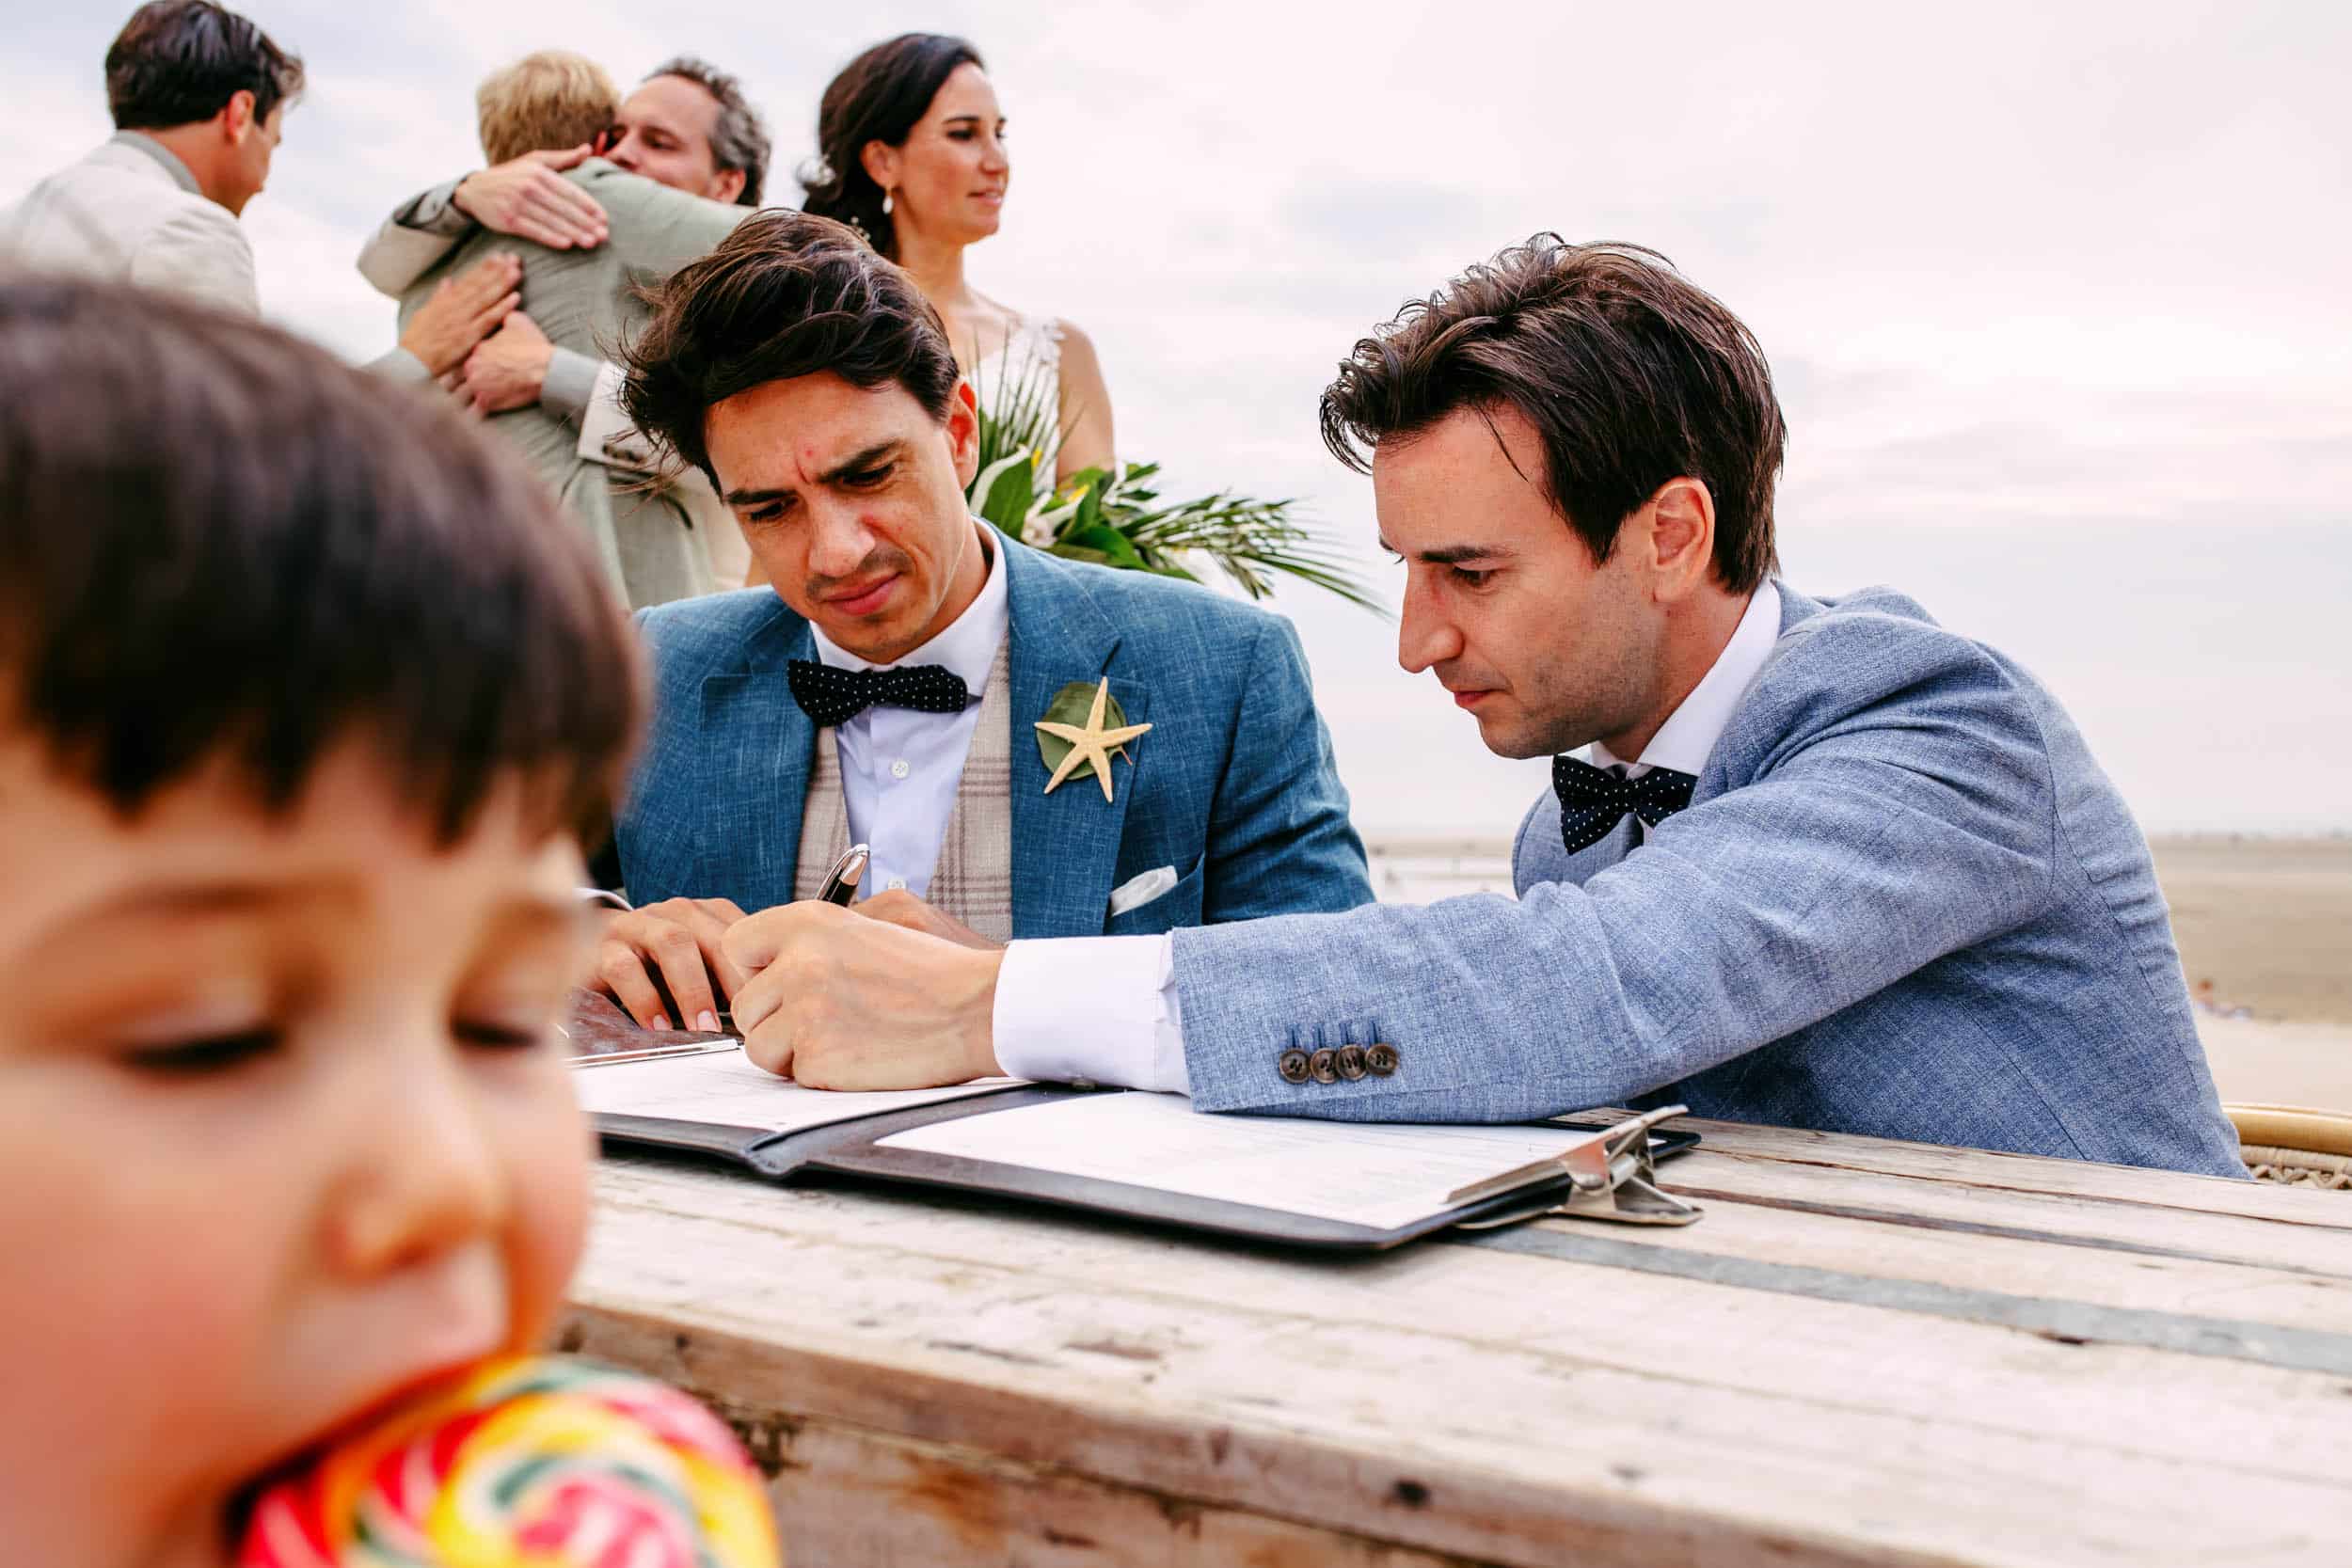 A man signs a marriage certificate with a little boy at the table and captures the perfect wedding moment through the lens of a wedding photographer.